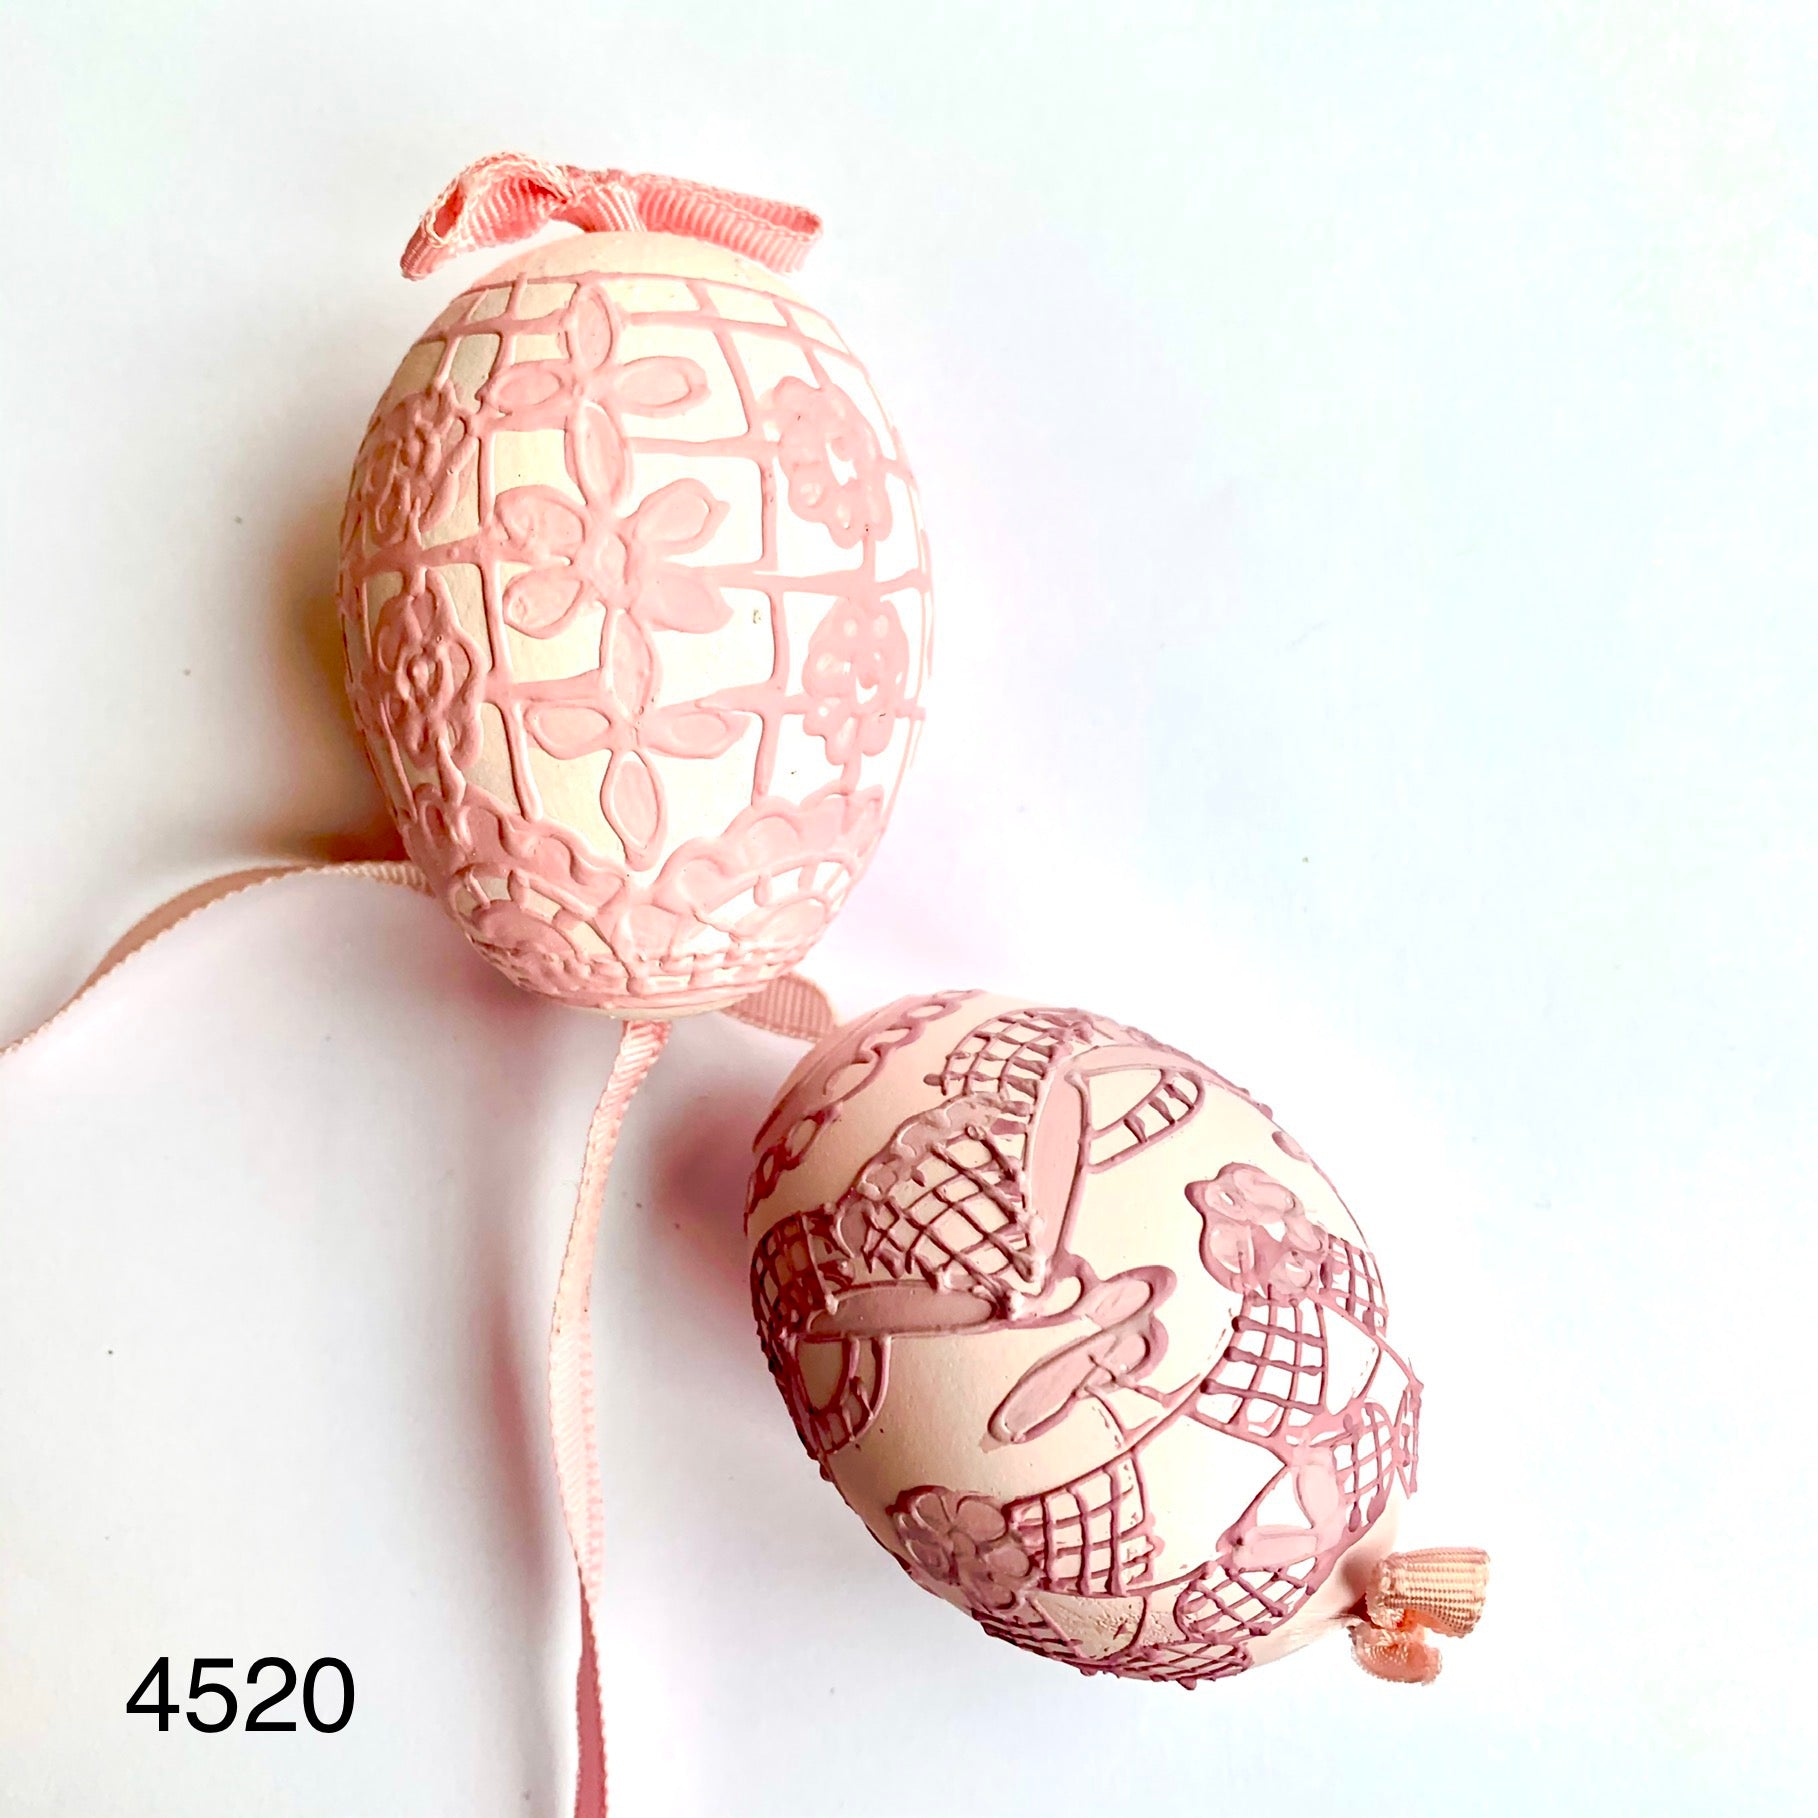 Peter's Hand Painted Egg from Austria 4520